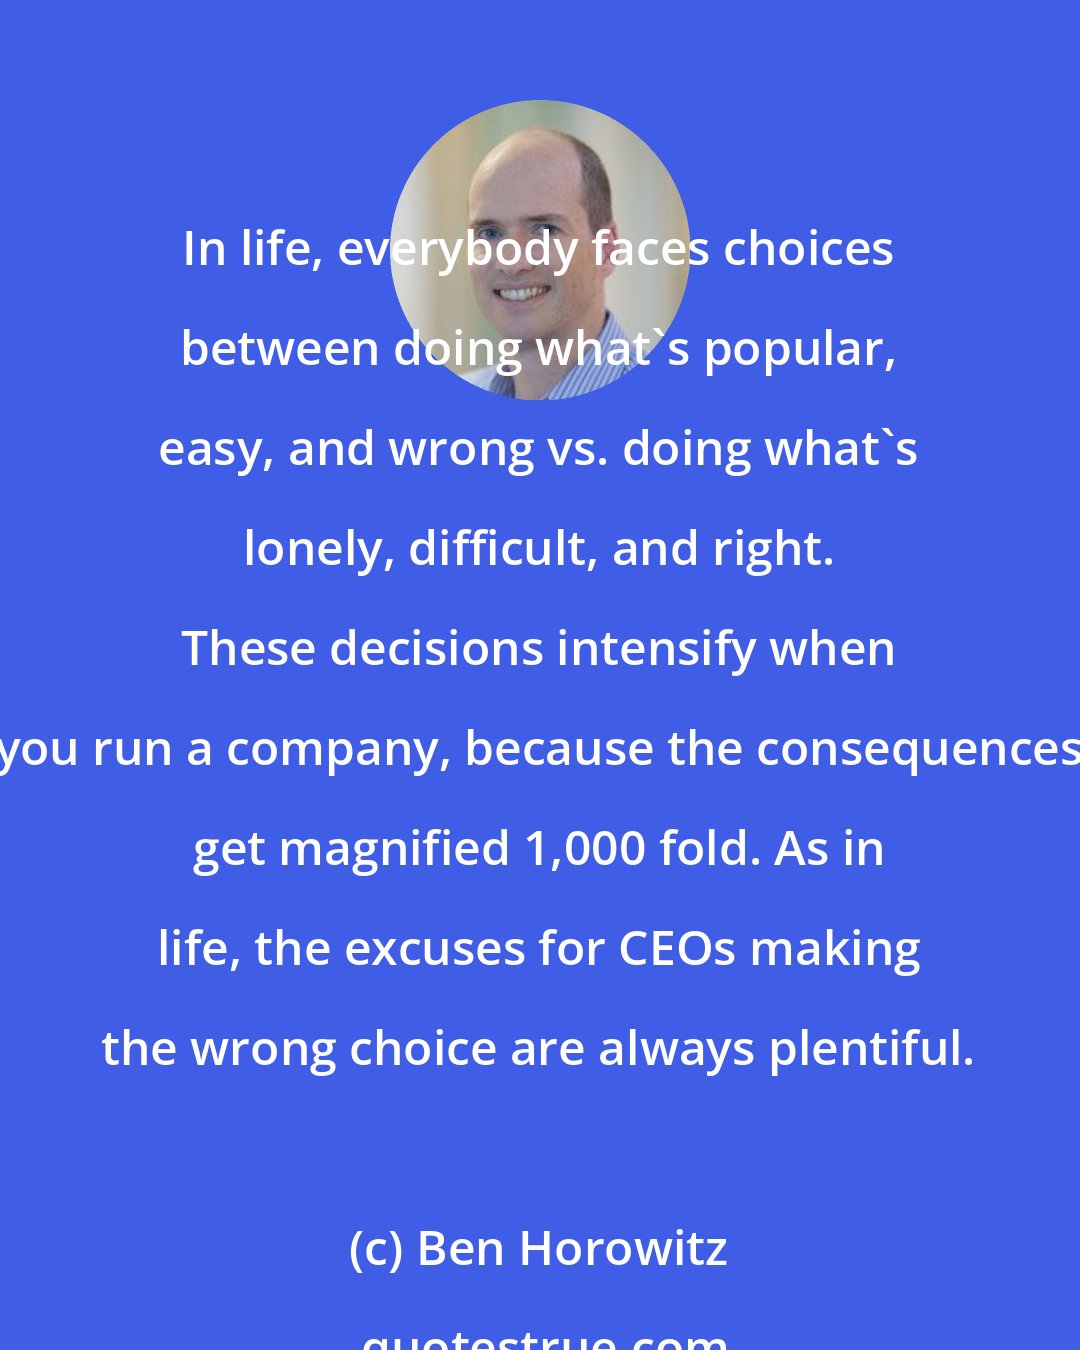 Ben Horowitz: In life, everybody faces choices between doing what's popular, easy, and wrong vs. doing what's lonely, difficult, and right. These decisions intensify when you run a company, because the consequences get magnified 1,000 fold. As in life, the excuses for CEOs making the wrong choice are always plentiful.